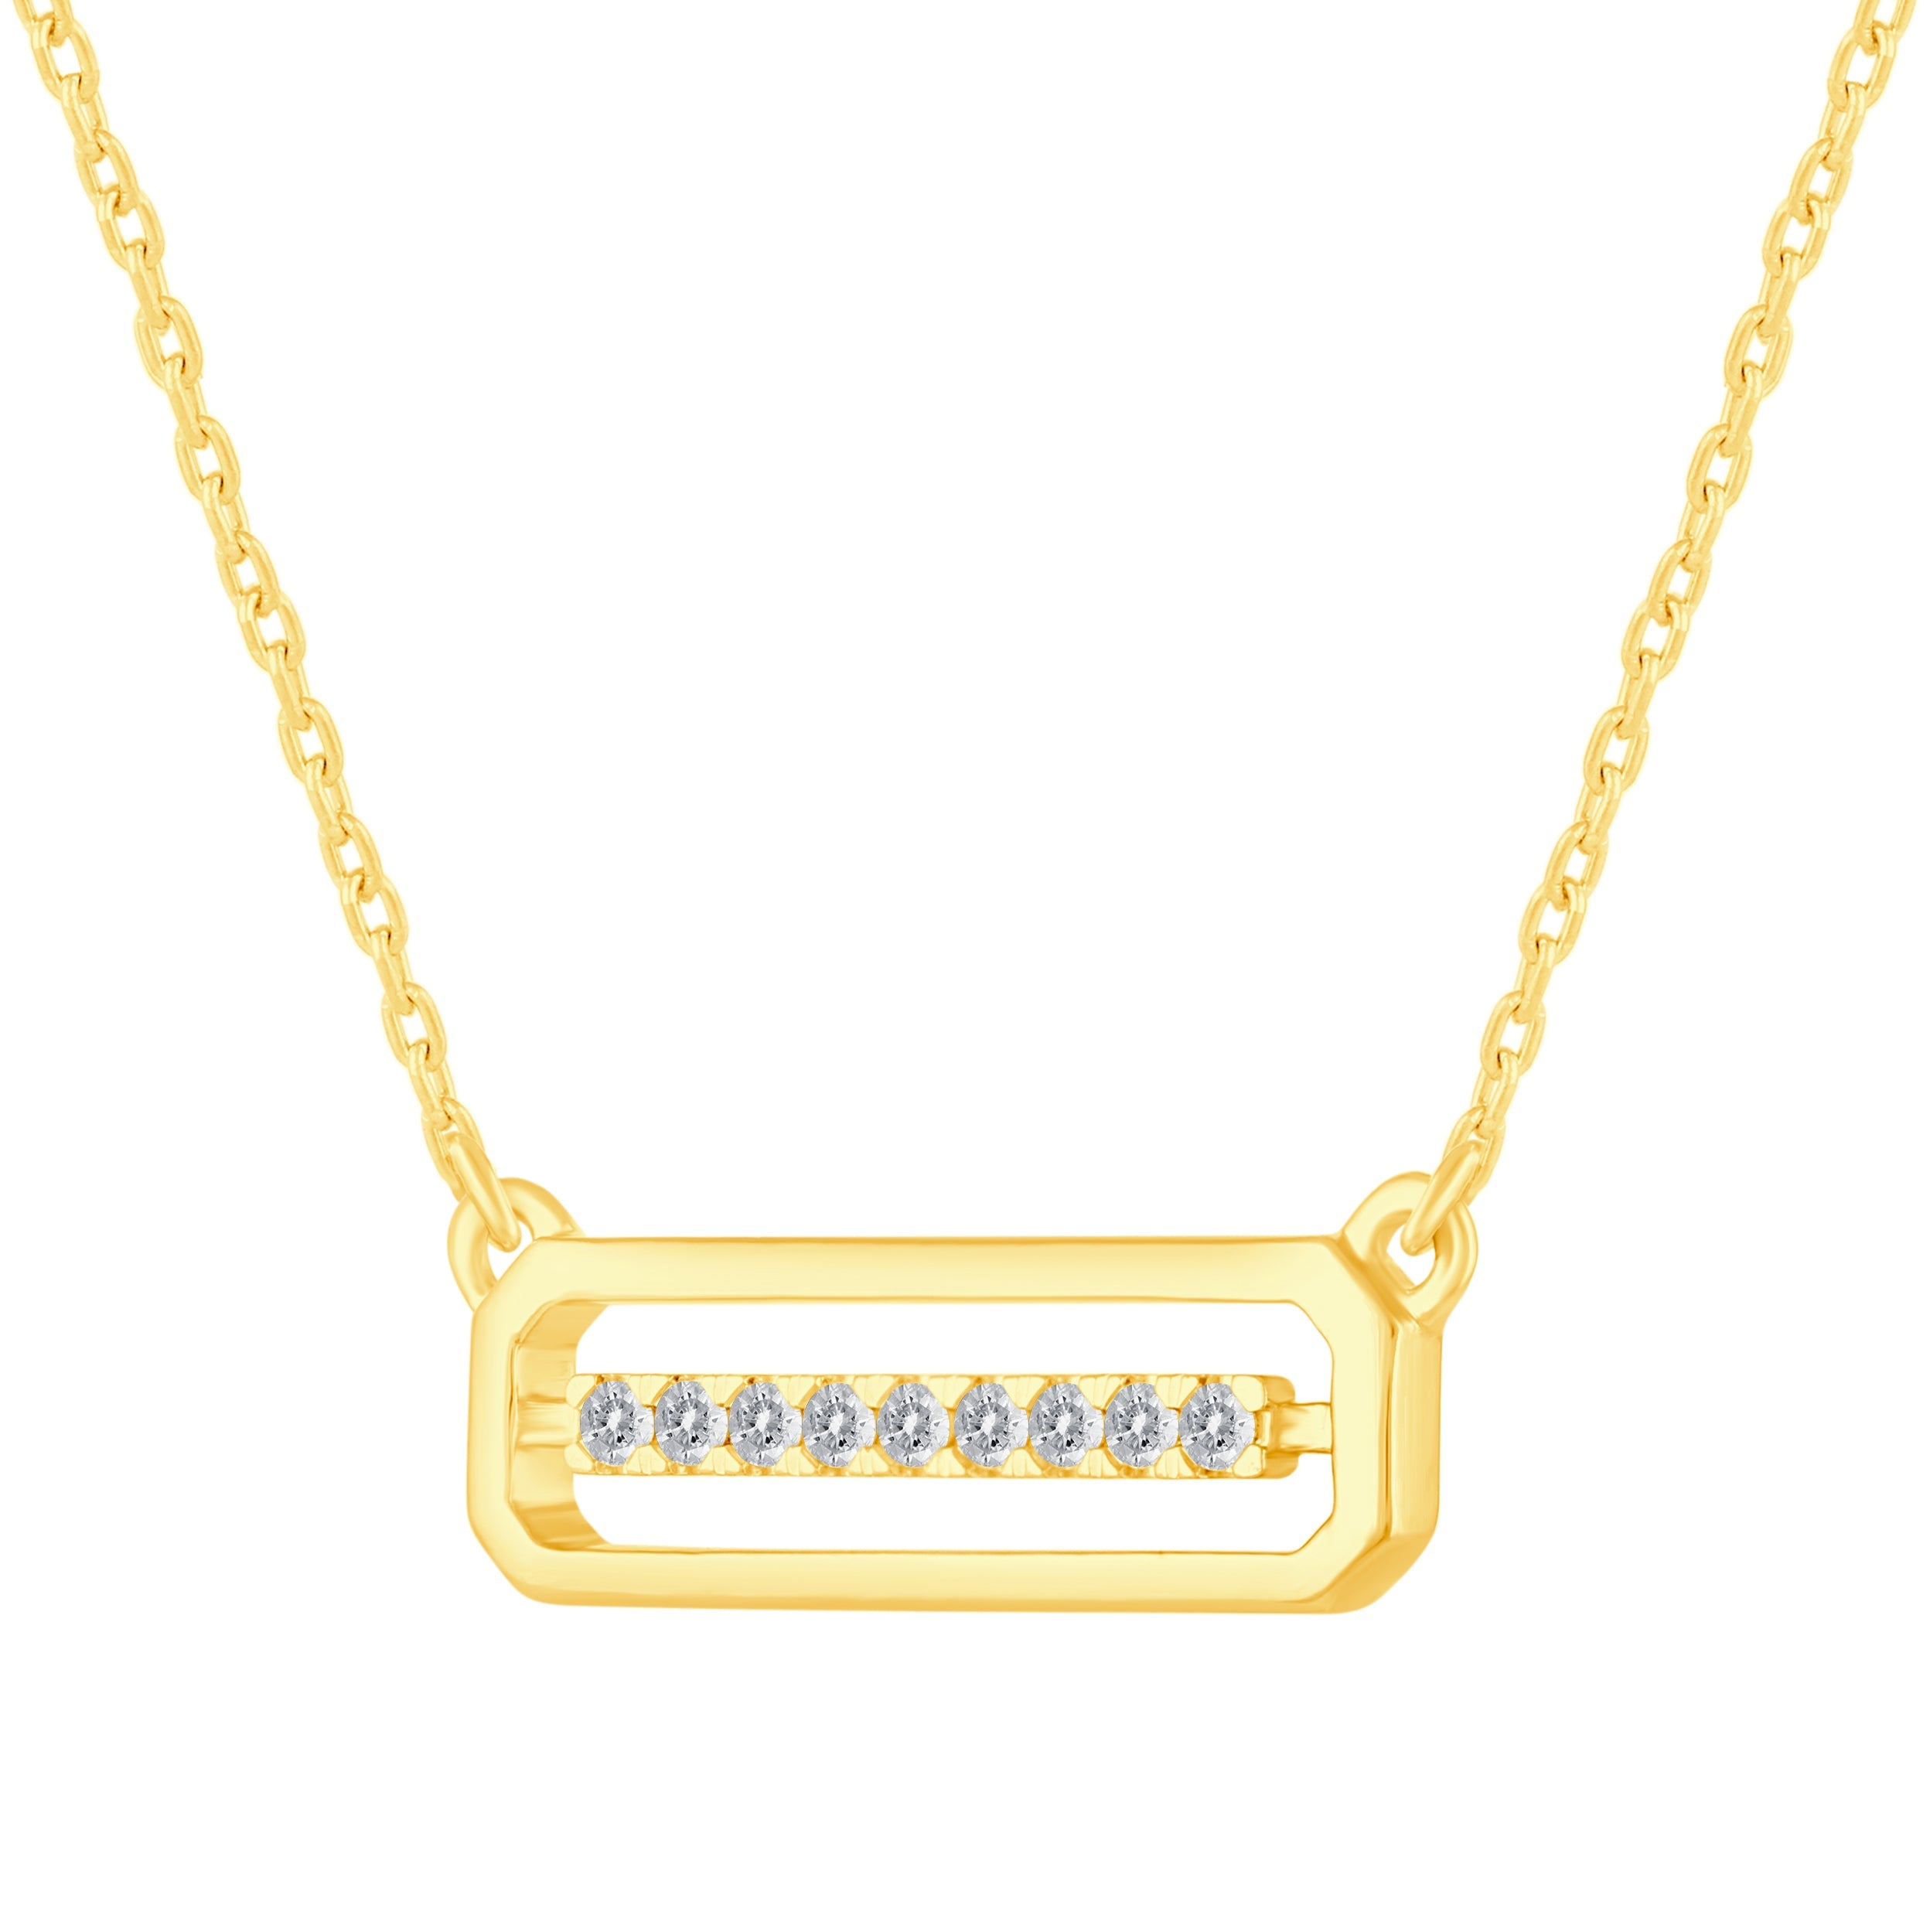 1/4 - 1/10 Cttw Diamond Bar Pendant Necklace set in 925 Sterling